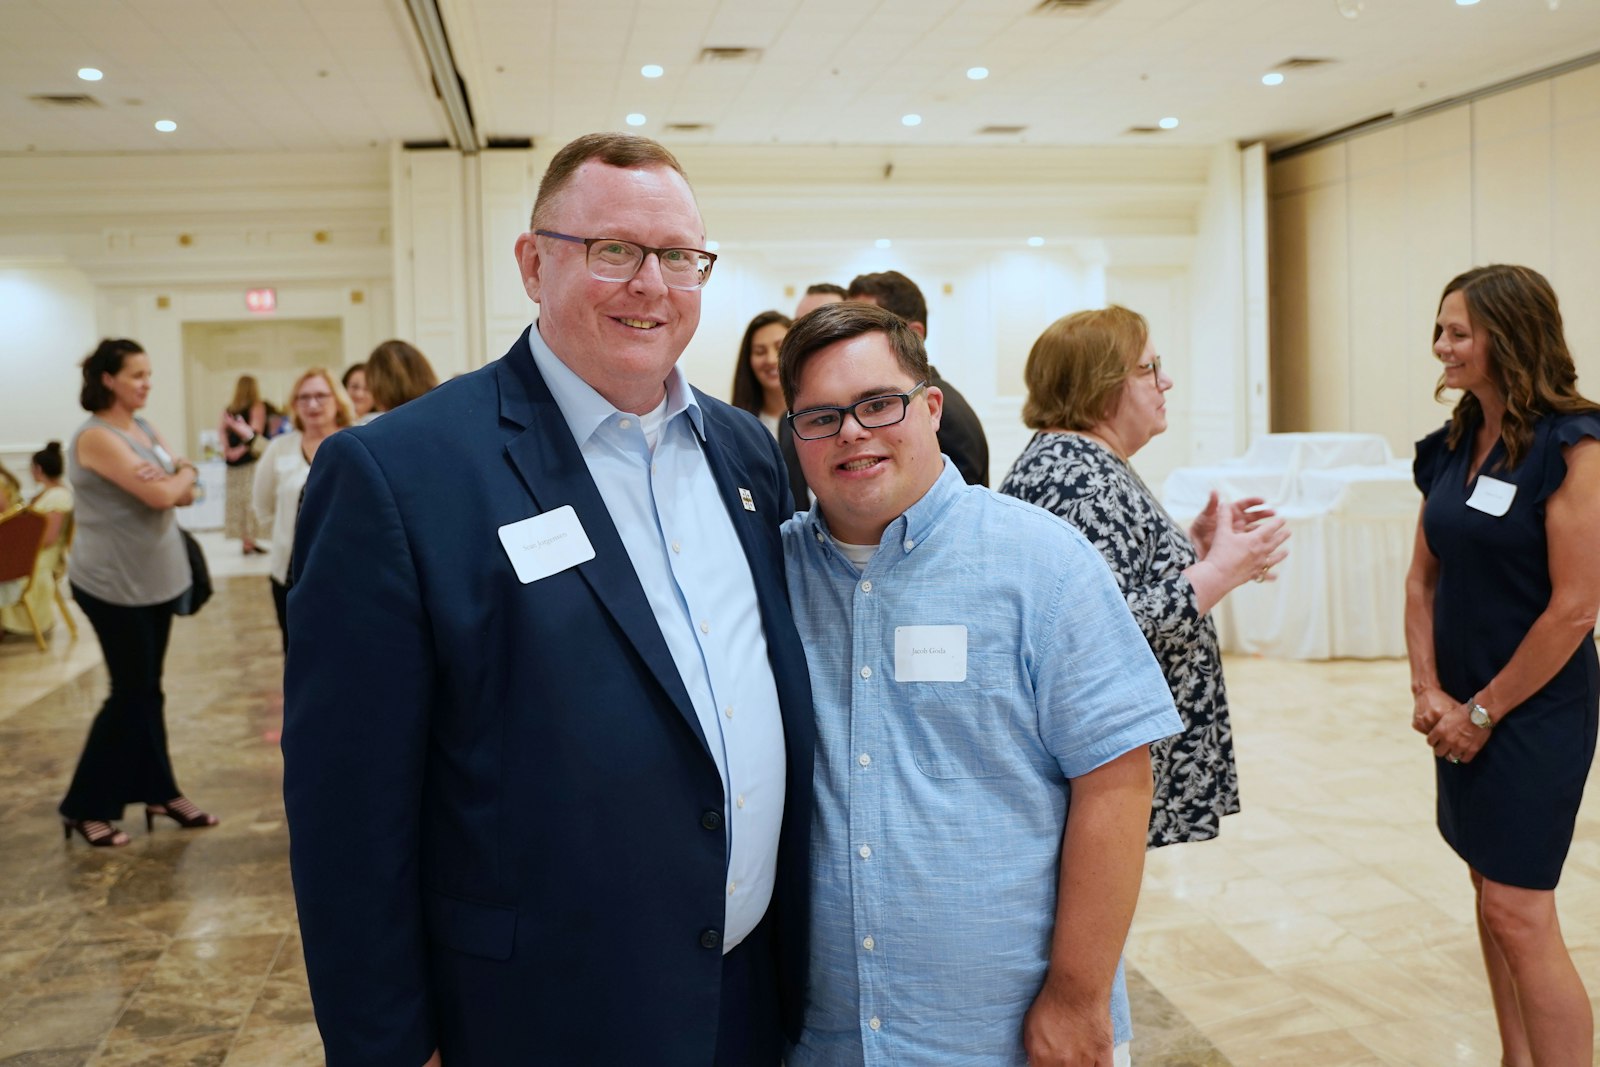 St. Mary Catholic Central president Sean Jorgensen poses for a photo with Jacob Goda, a graduate of the school's St. Andre Bessette Open Door Inclusion Program, during a benefit dinner for the new St. Margaret of Castello Granting Fund, which seeks to support programs like St. Mary Catholic Central's in Catholic schools throughout the Archdiocese of Detroit. (Daniel Meloy | Detroit Catholic)